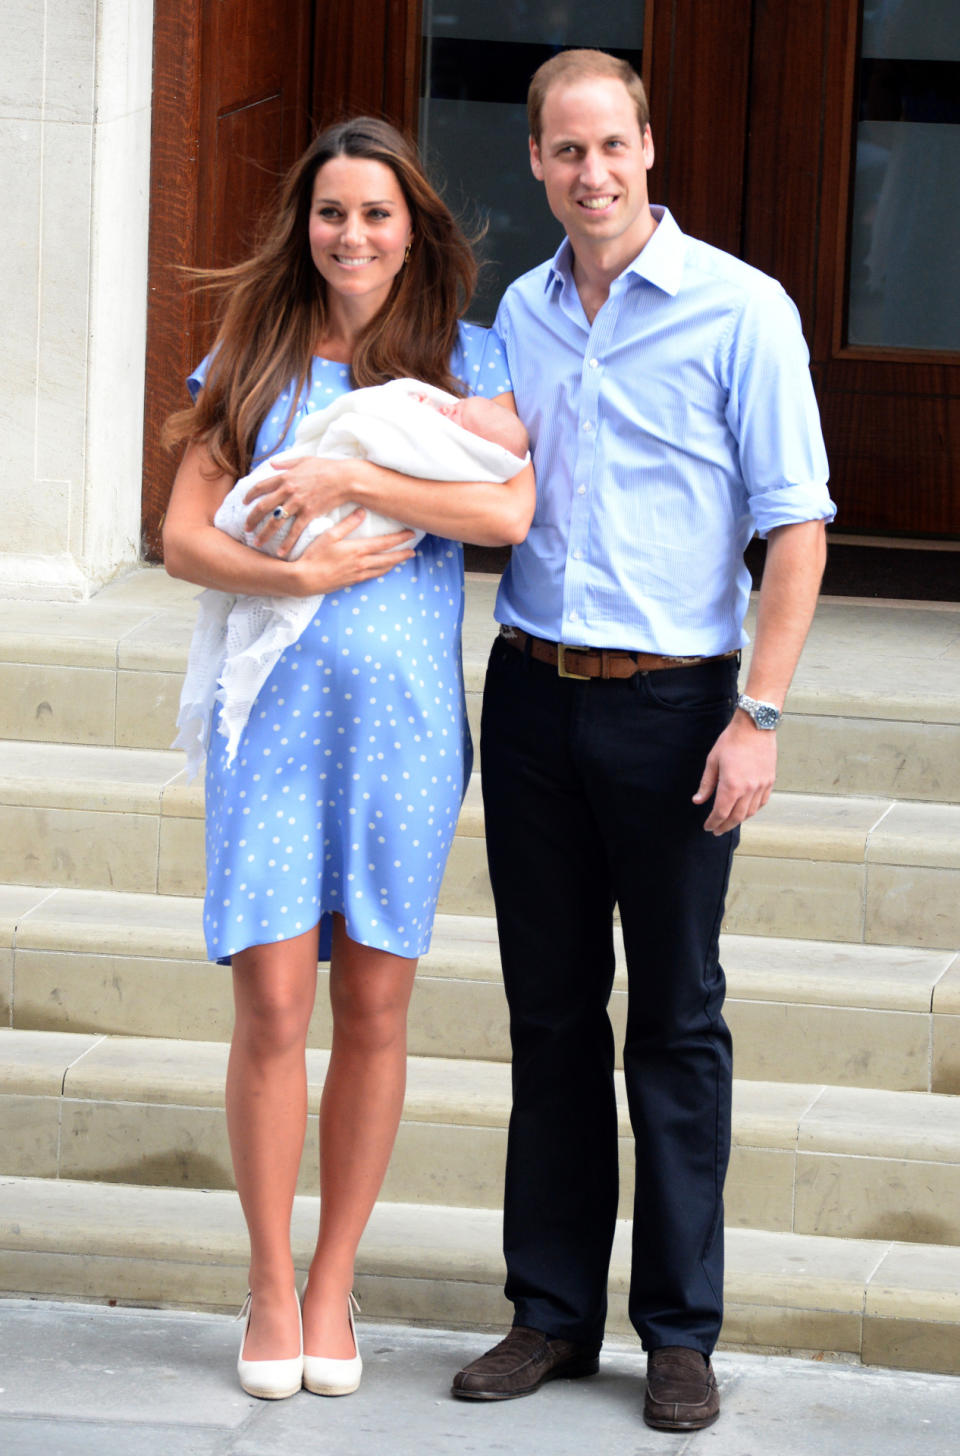 <p>Kate welcomed Prince George in a bespoke blue-and-white polka dot dress by Jenny Packham. On her feet, the Duchess chose cream wedges from Pied a Terre. </p><p><i>[Photo: PA]</i></p>